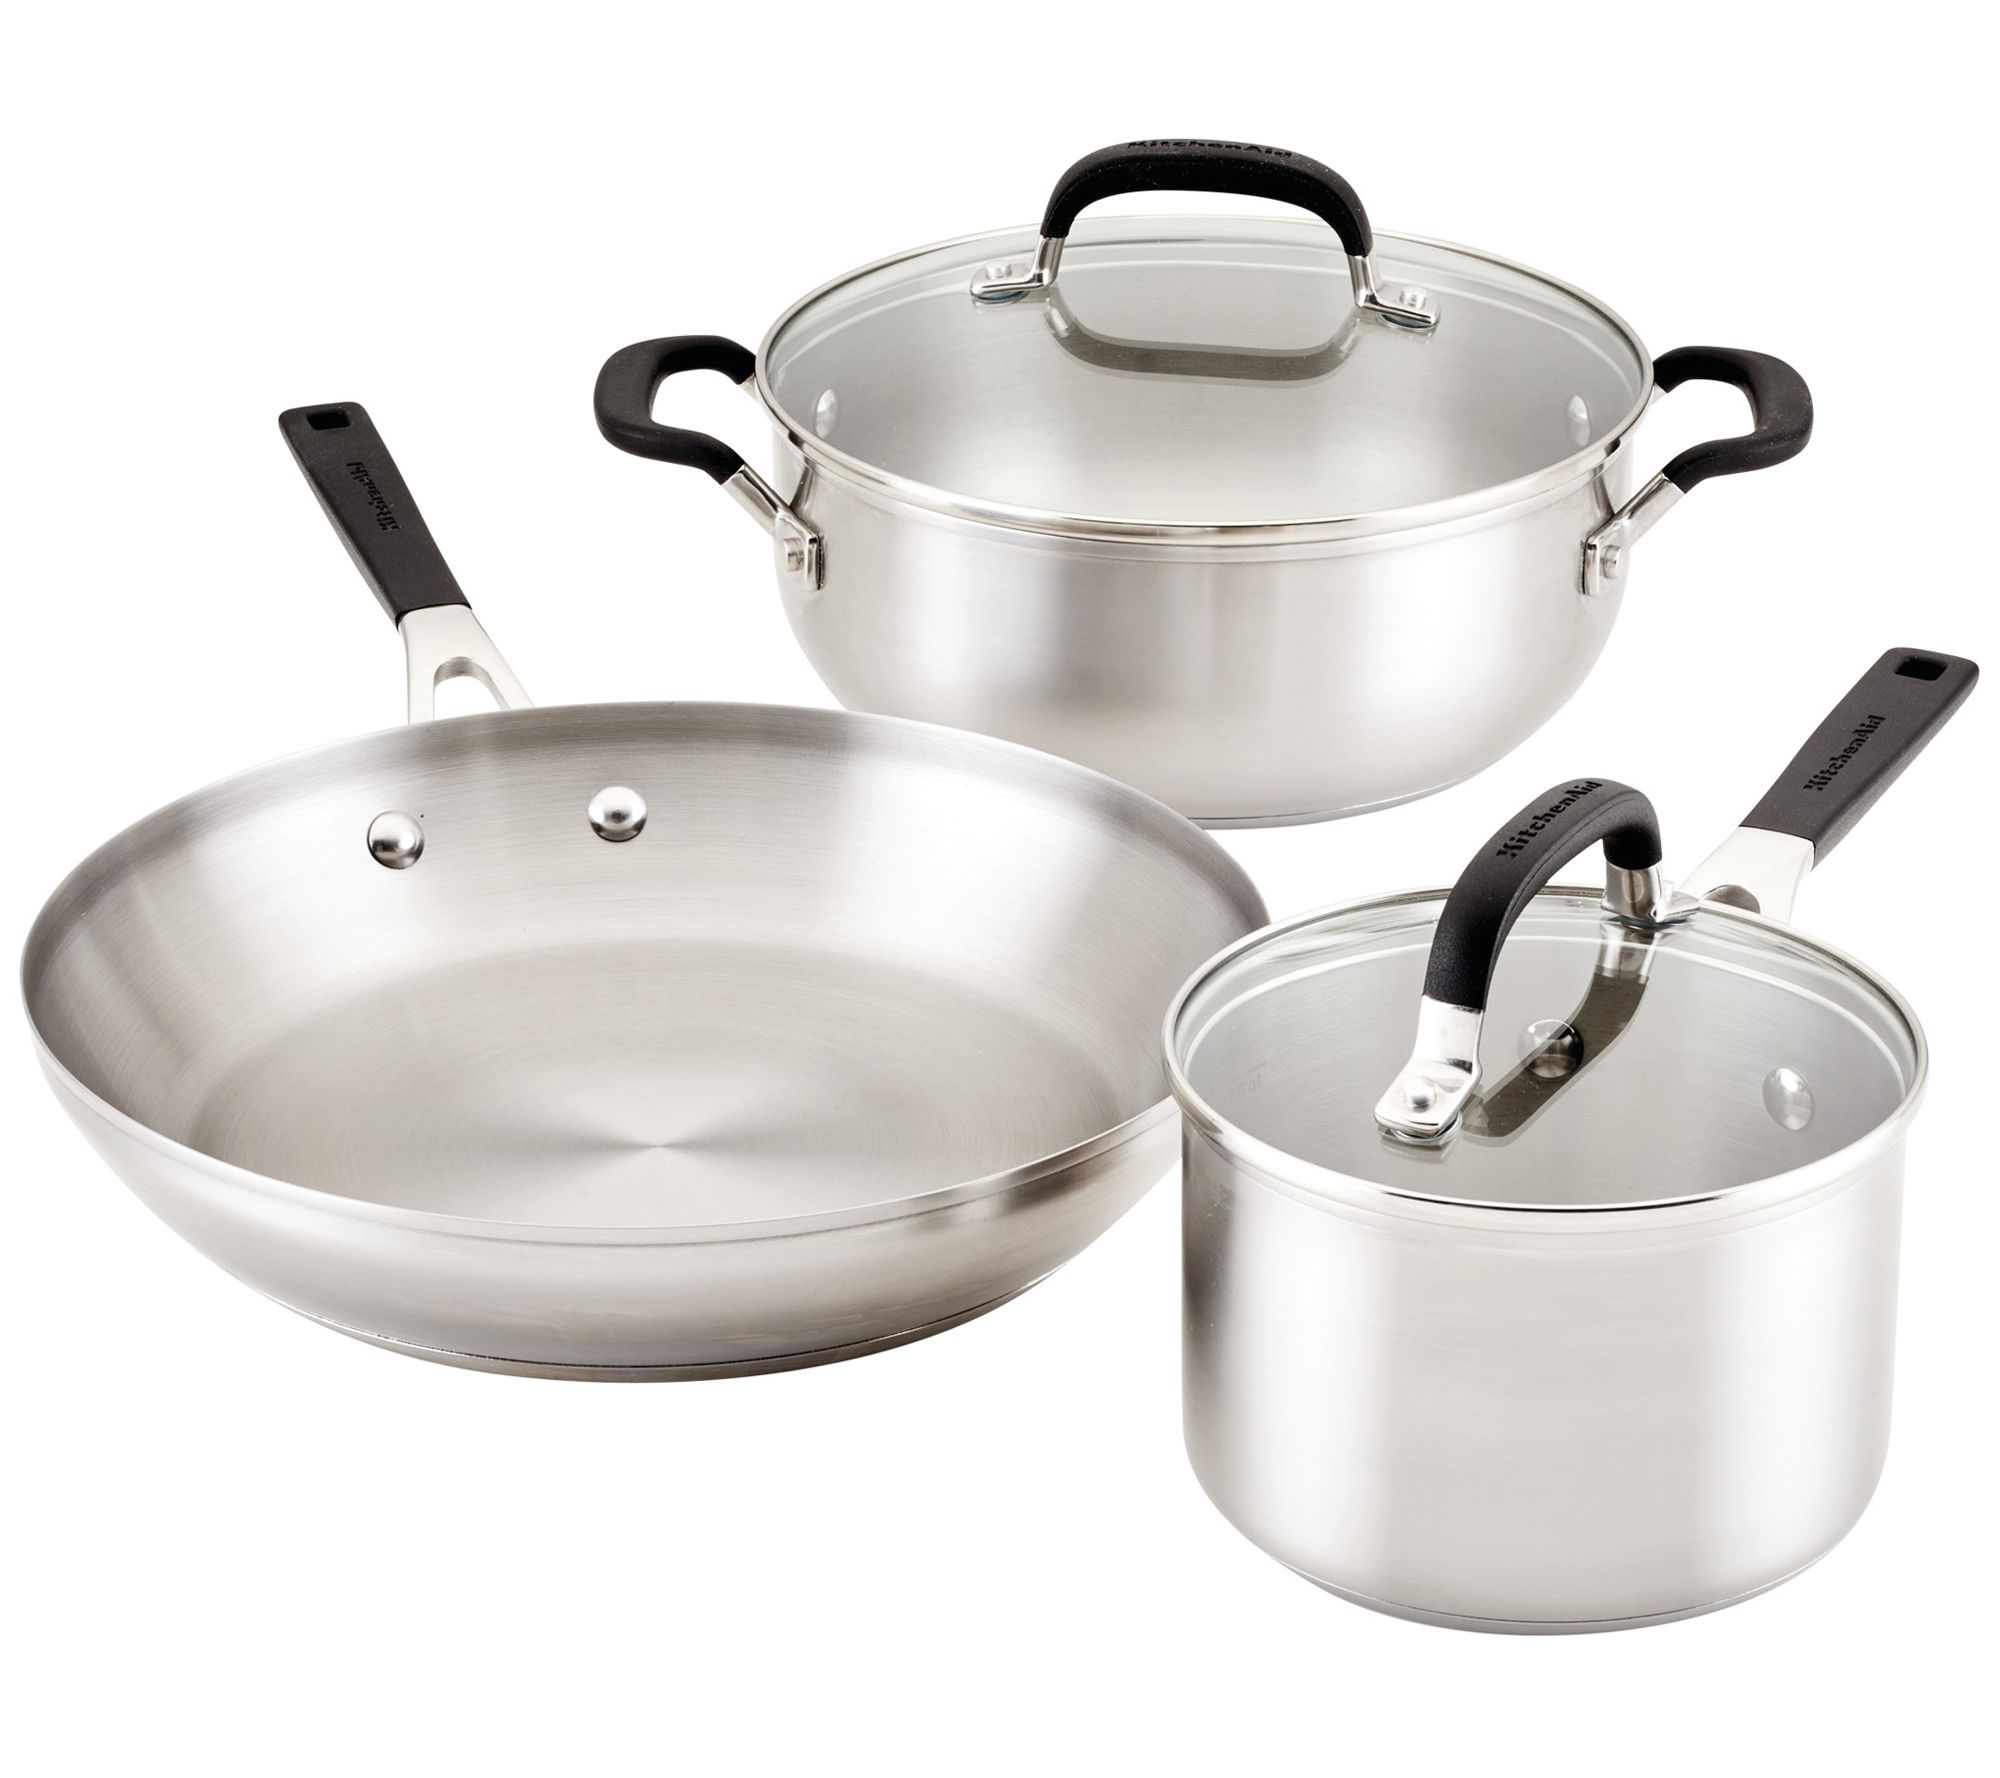 KitchenAid 10-pc. Stainless Steel Cookware Set